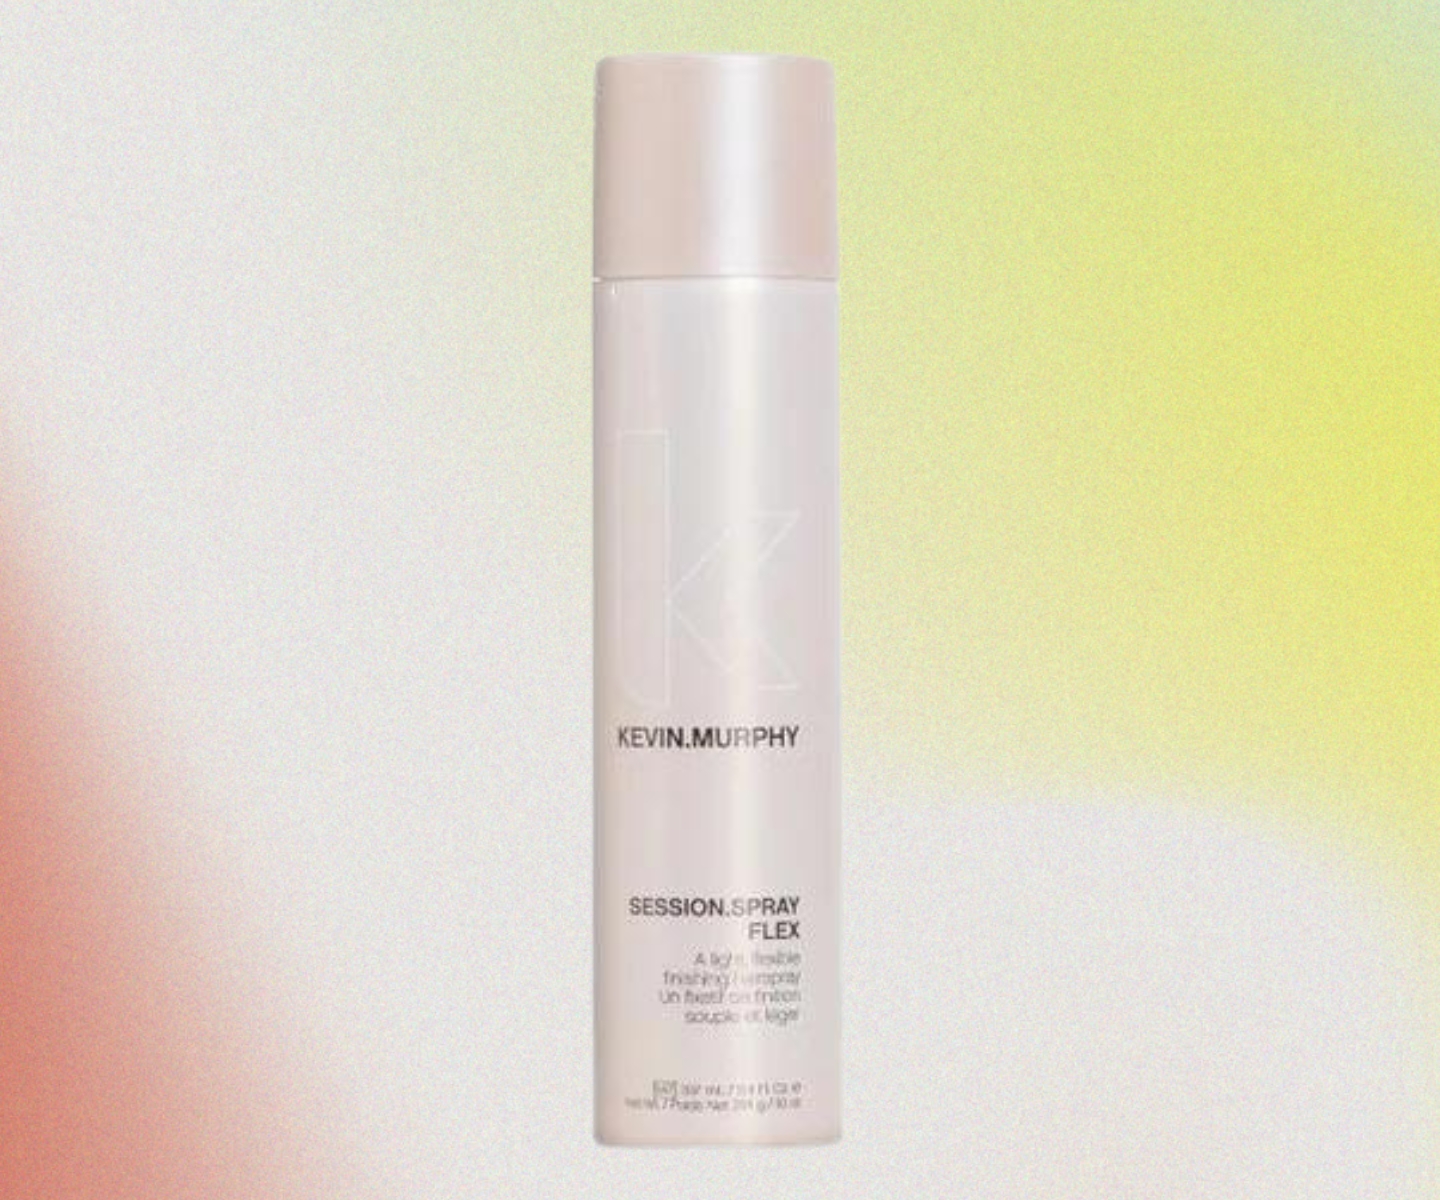 KEVIN.MURPHY Session Spray Flex 400ml in-article